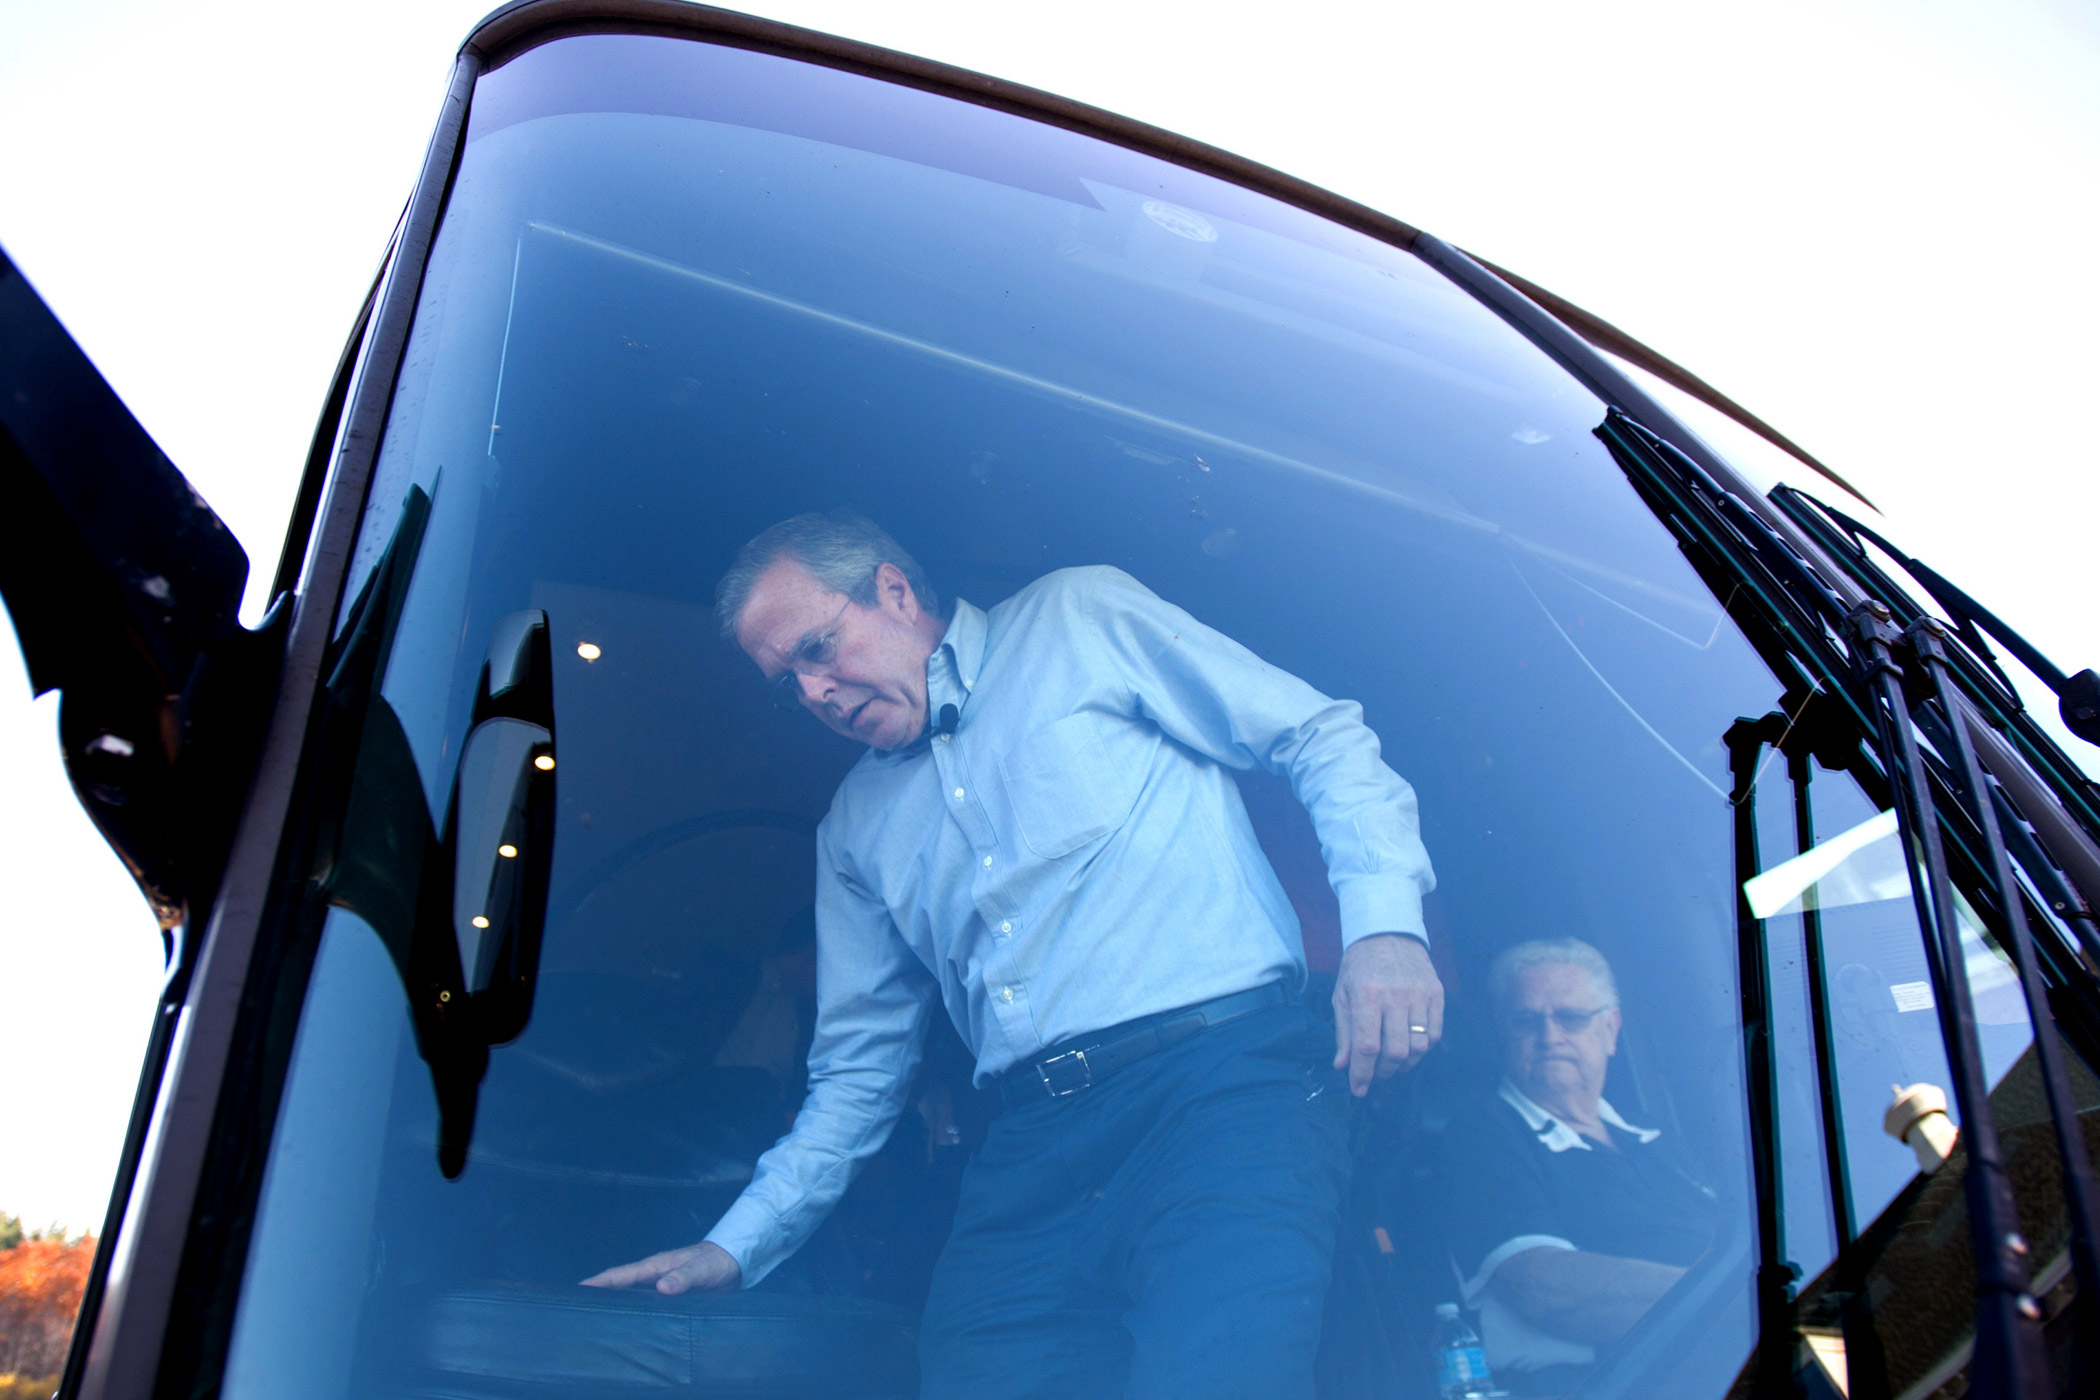 Republican presidential candidate Jeb Bush gets off his campaign bus in Goffstown, N.H. on Nov. 4, 2015.